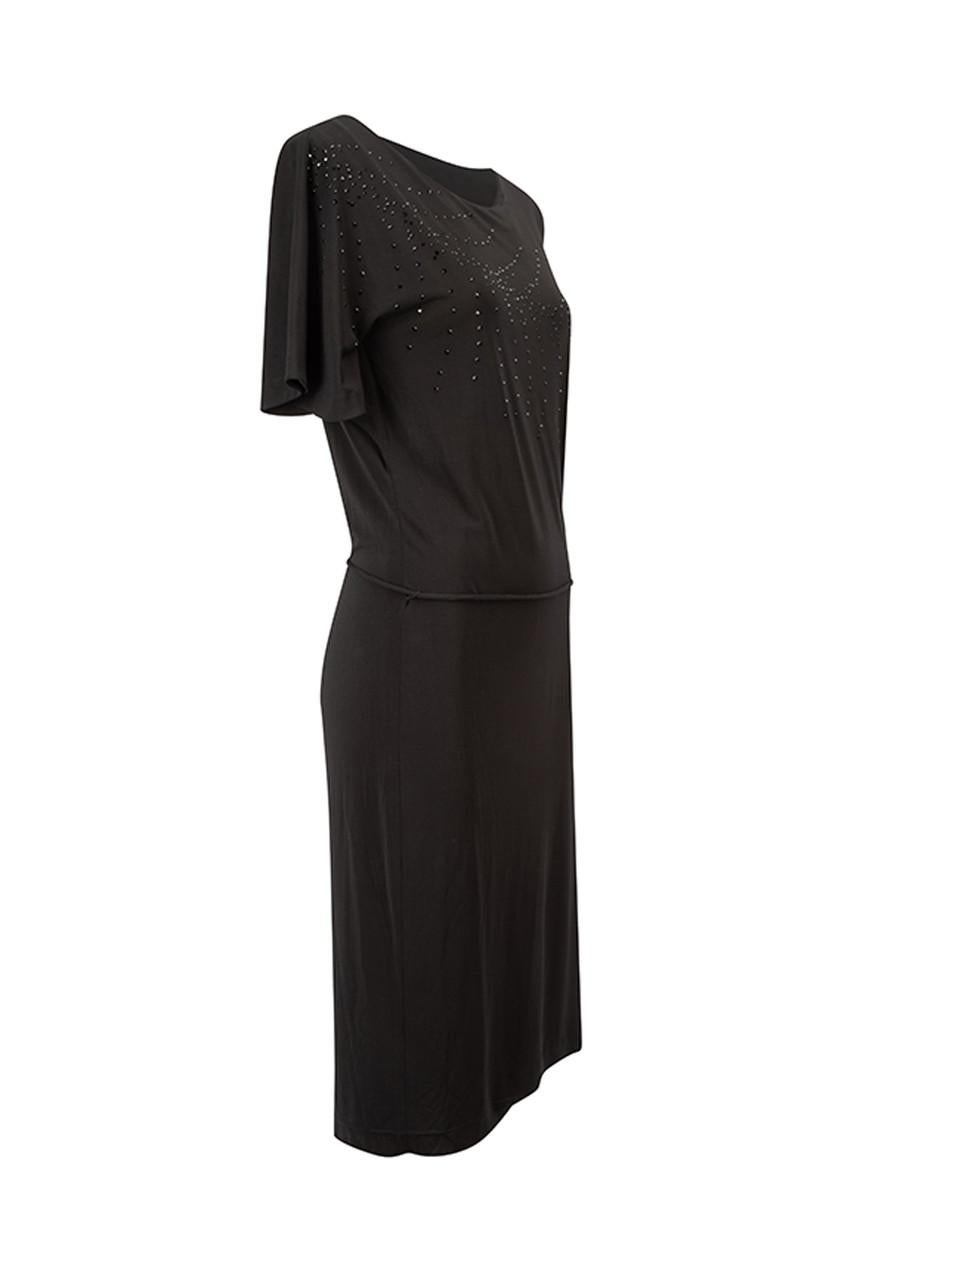 CONDITION is Very good. Minimal wear to dress is evident. Minimal wear to the outer fabric and there are faint marks around the neckline and sleeves on this used Escada designer resale item.



Details


Black

Viscose

Studded

Loose fit

Knee